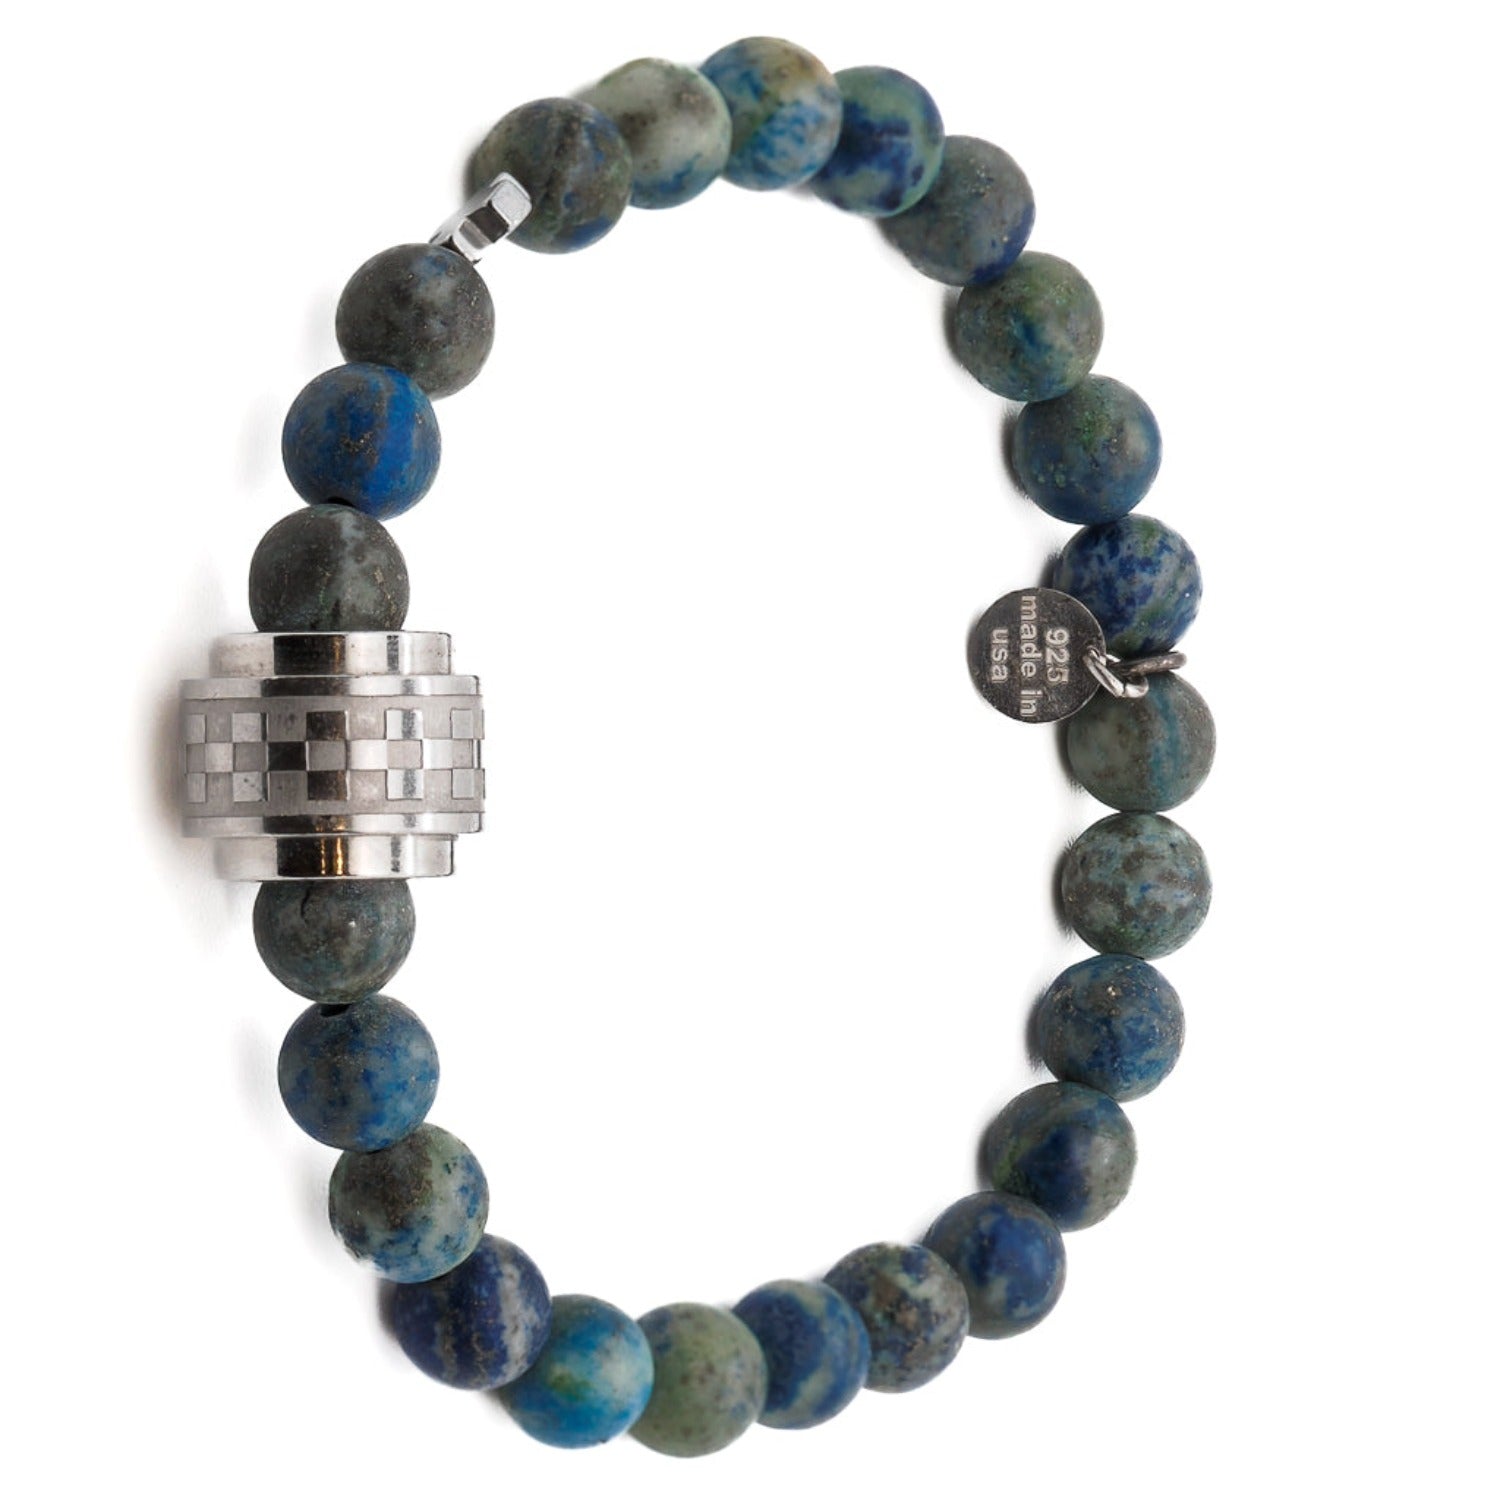 Meticulously Handcrafted - Azurite Stone Bracelet with Unique Beads.